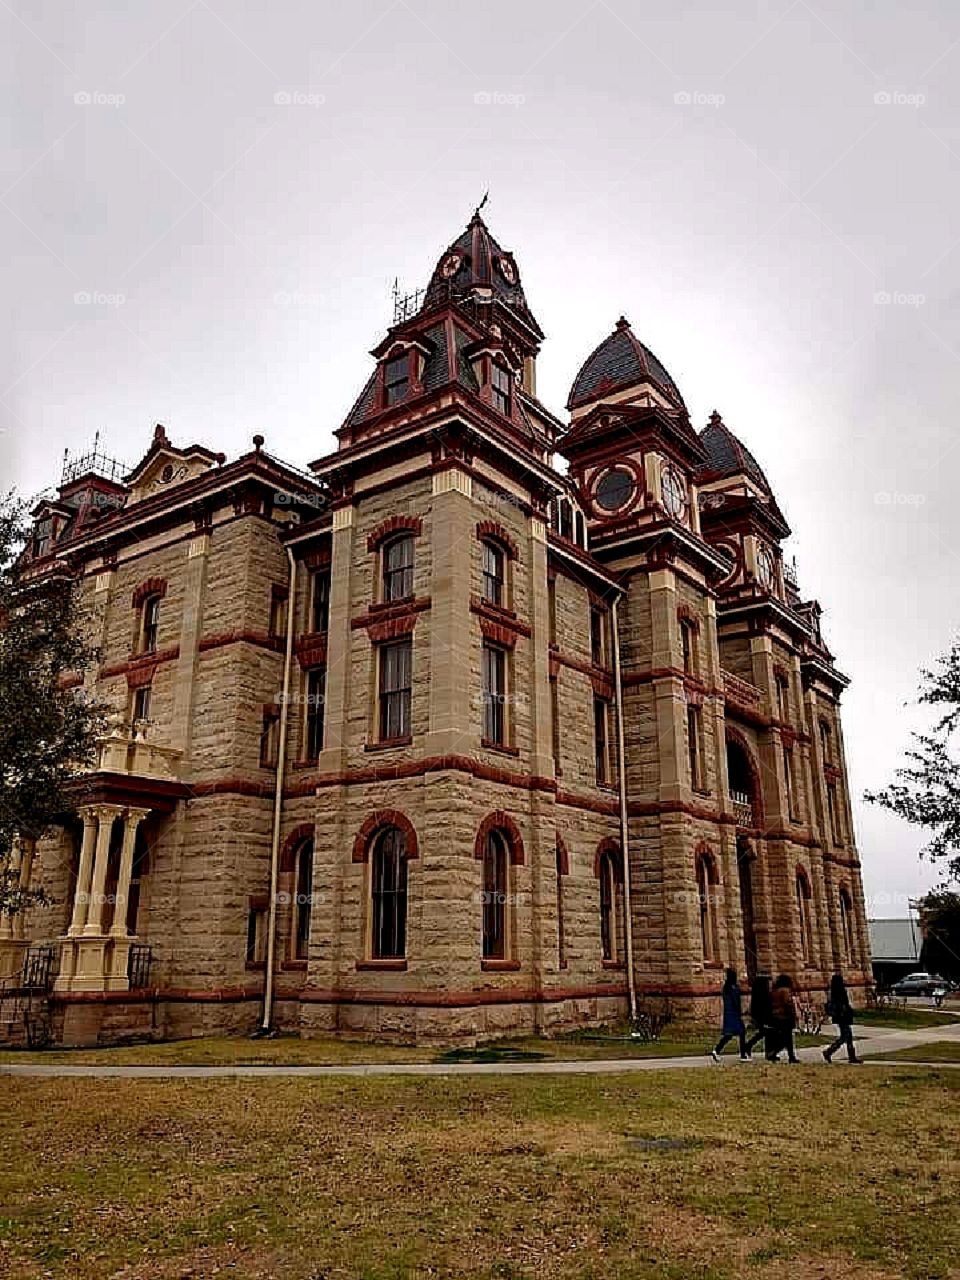 Caldwell County Courthouse, Lockhart, TX